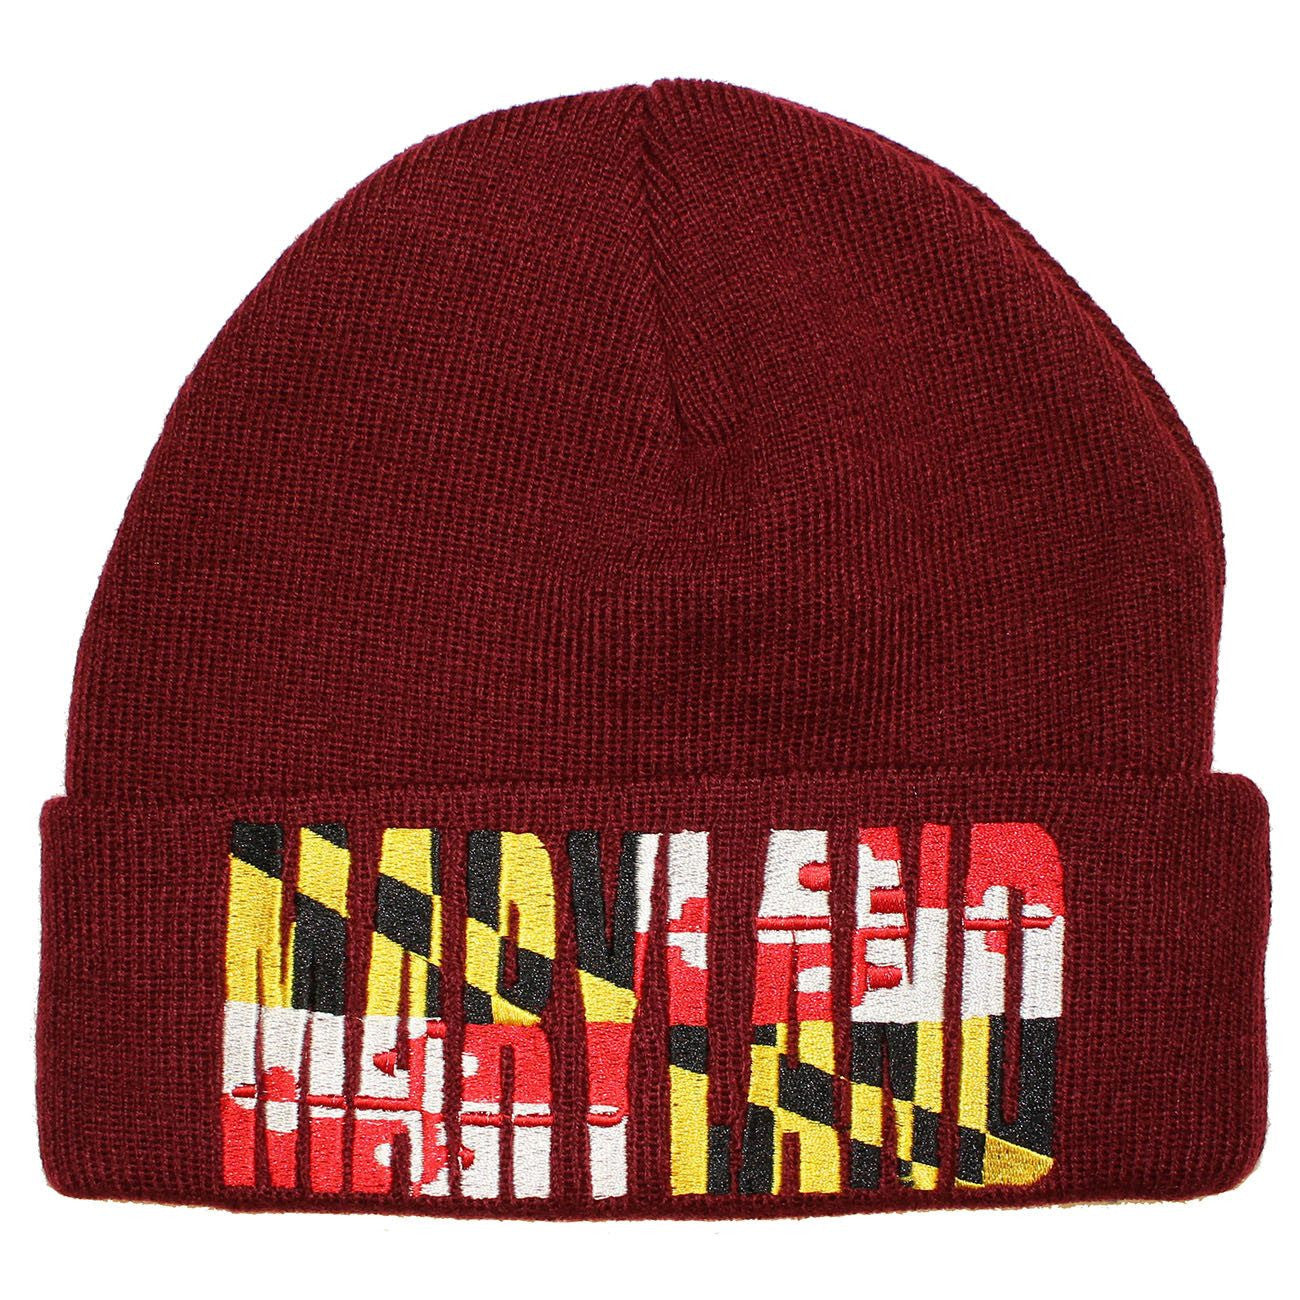 Maryland Flag Embroidered (Burgundy Red) / Knit Beanie Cap - Route One Apparel